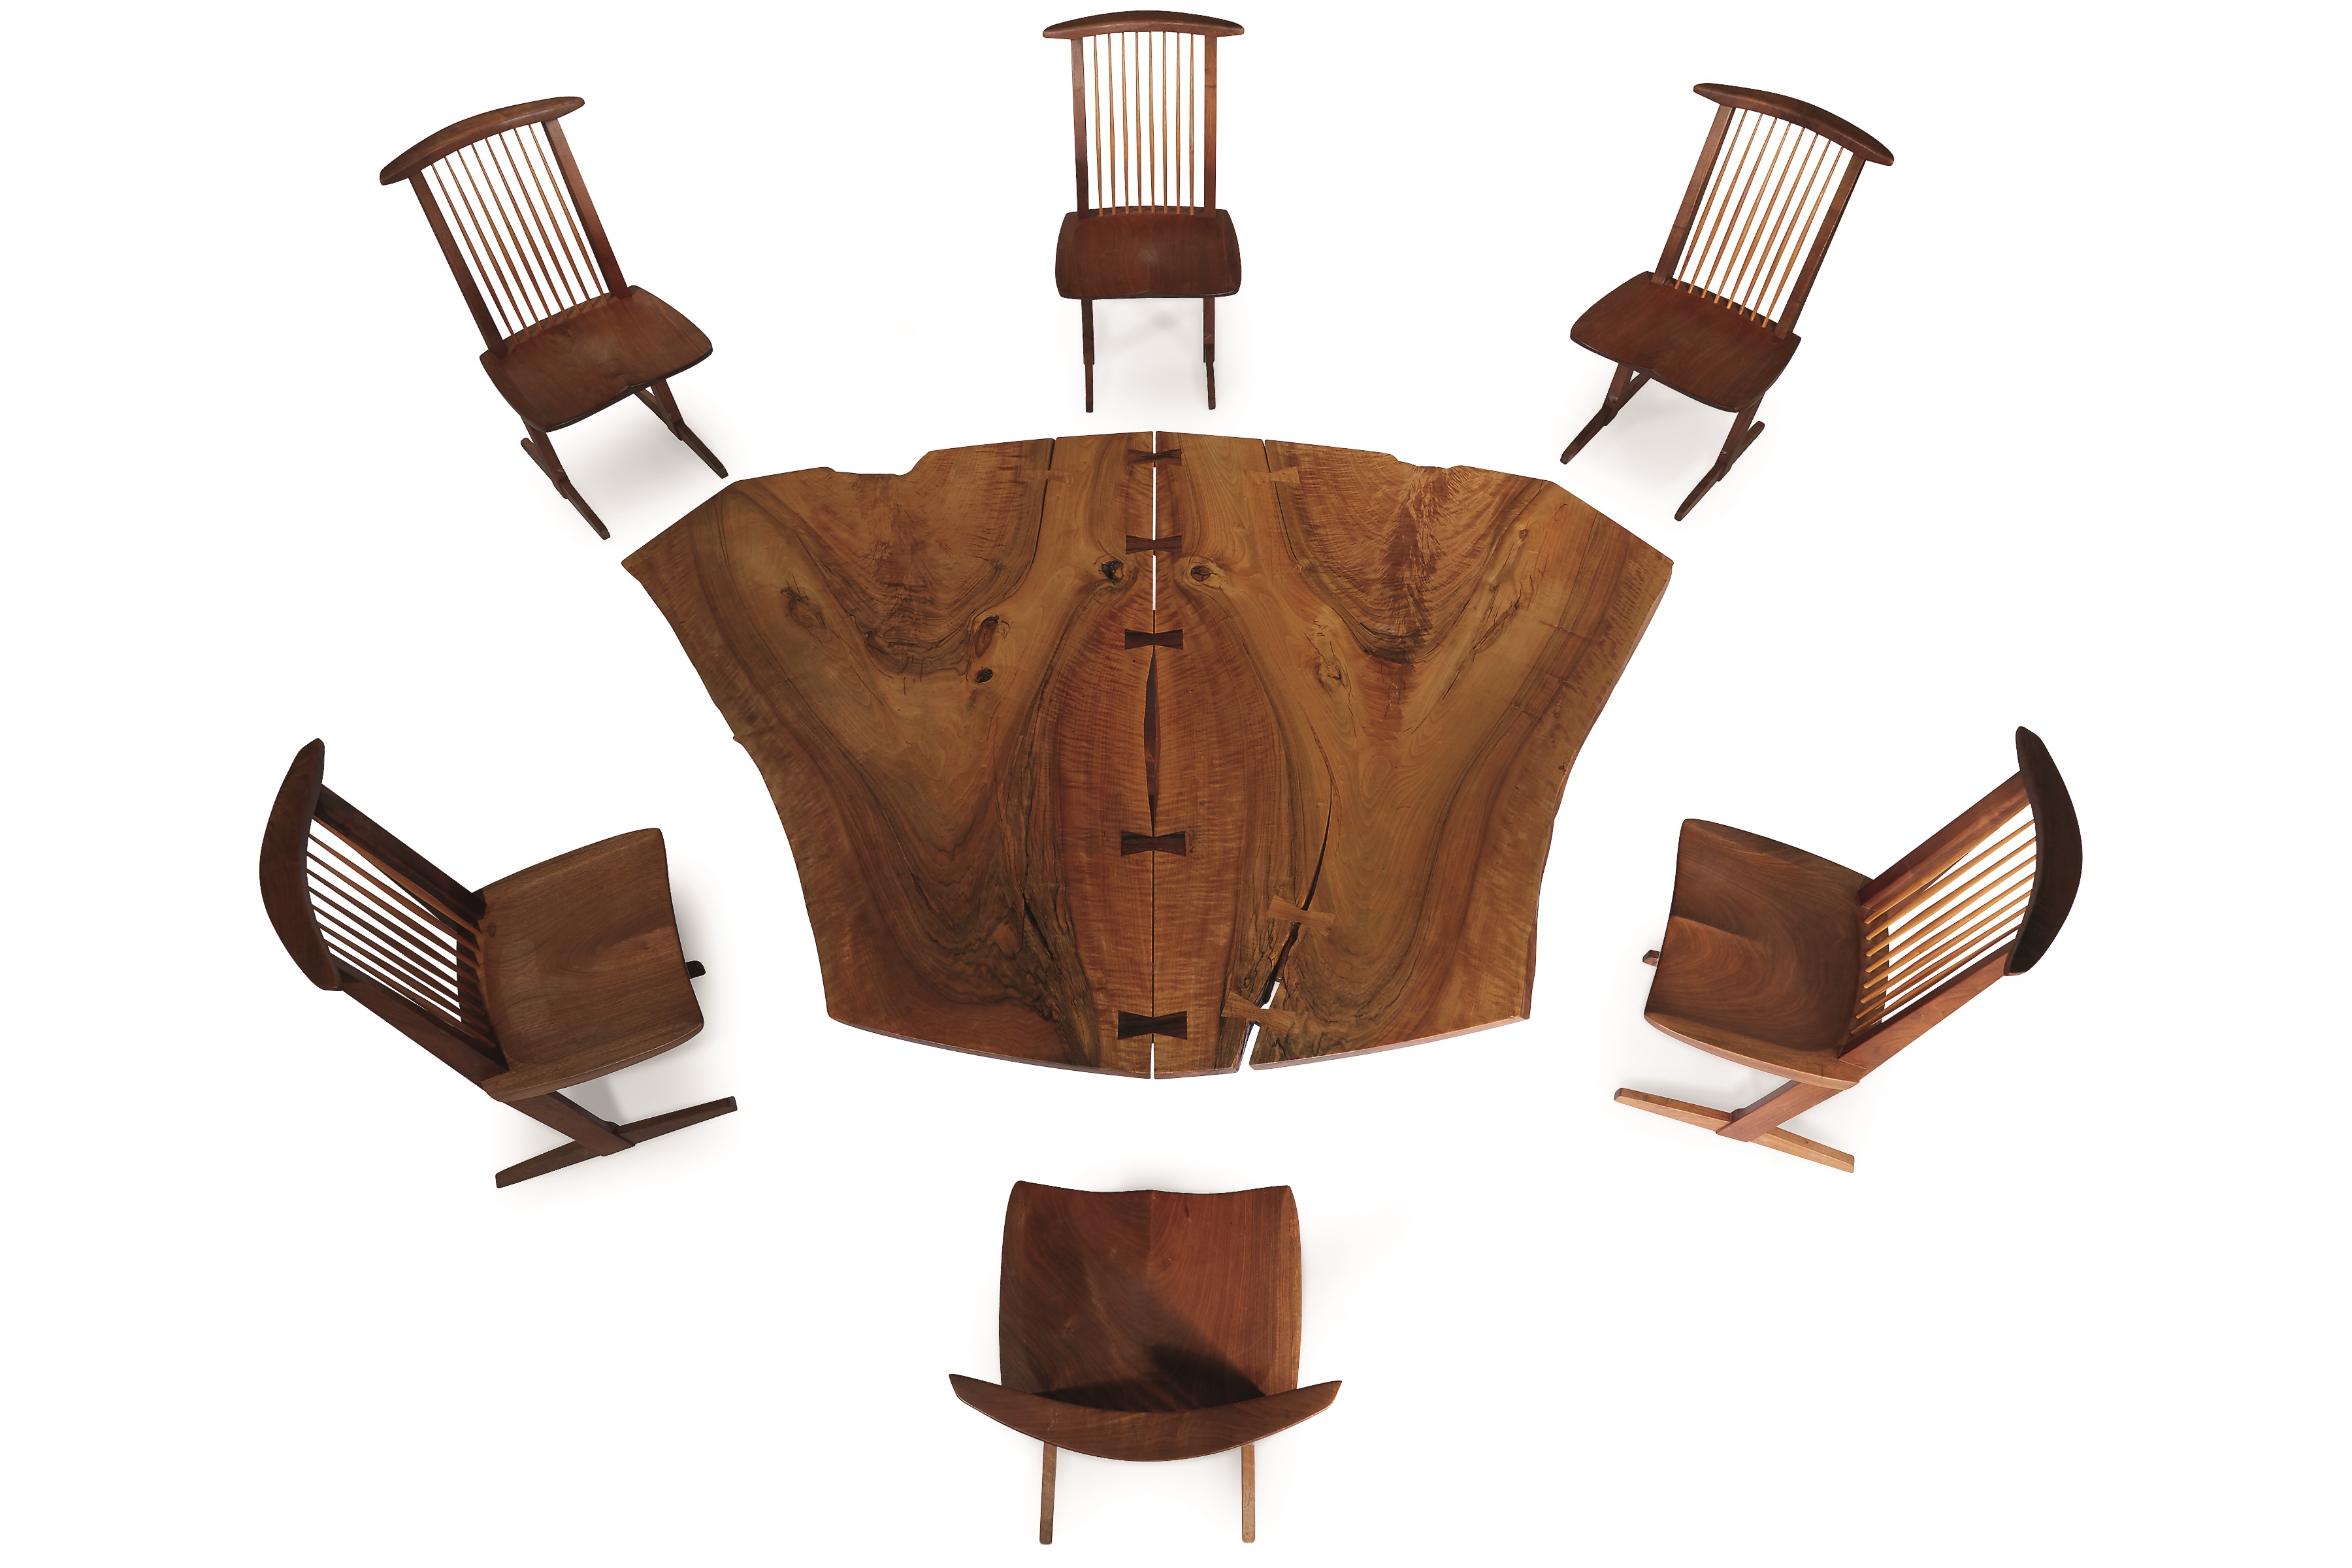 A Sanso "Reception House" table and six Conoid chairs, designed and made by George Nakashima in 1981. The table is 28 inches high, 60 inches wide, and 84 1/2 inches in diameter. All seven pieces are signed with the surname of the client.